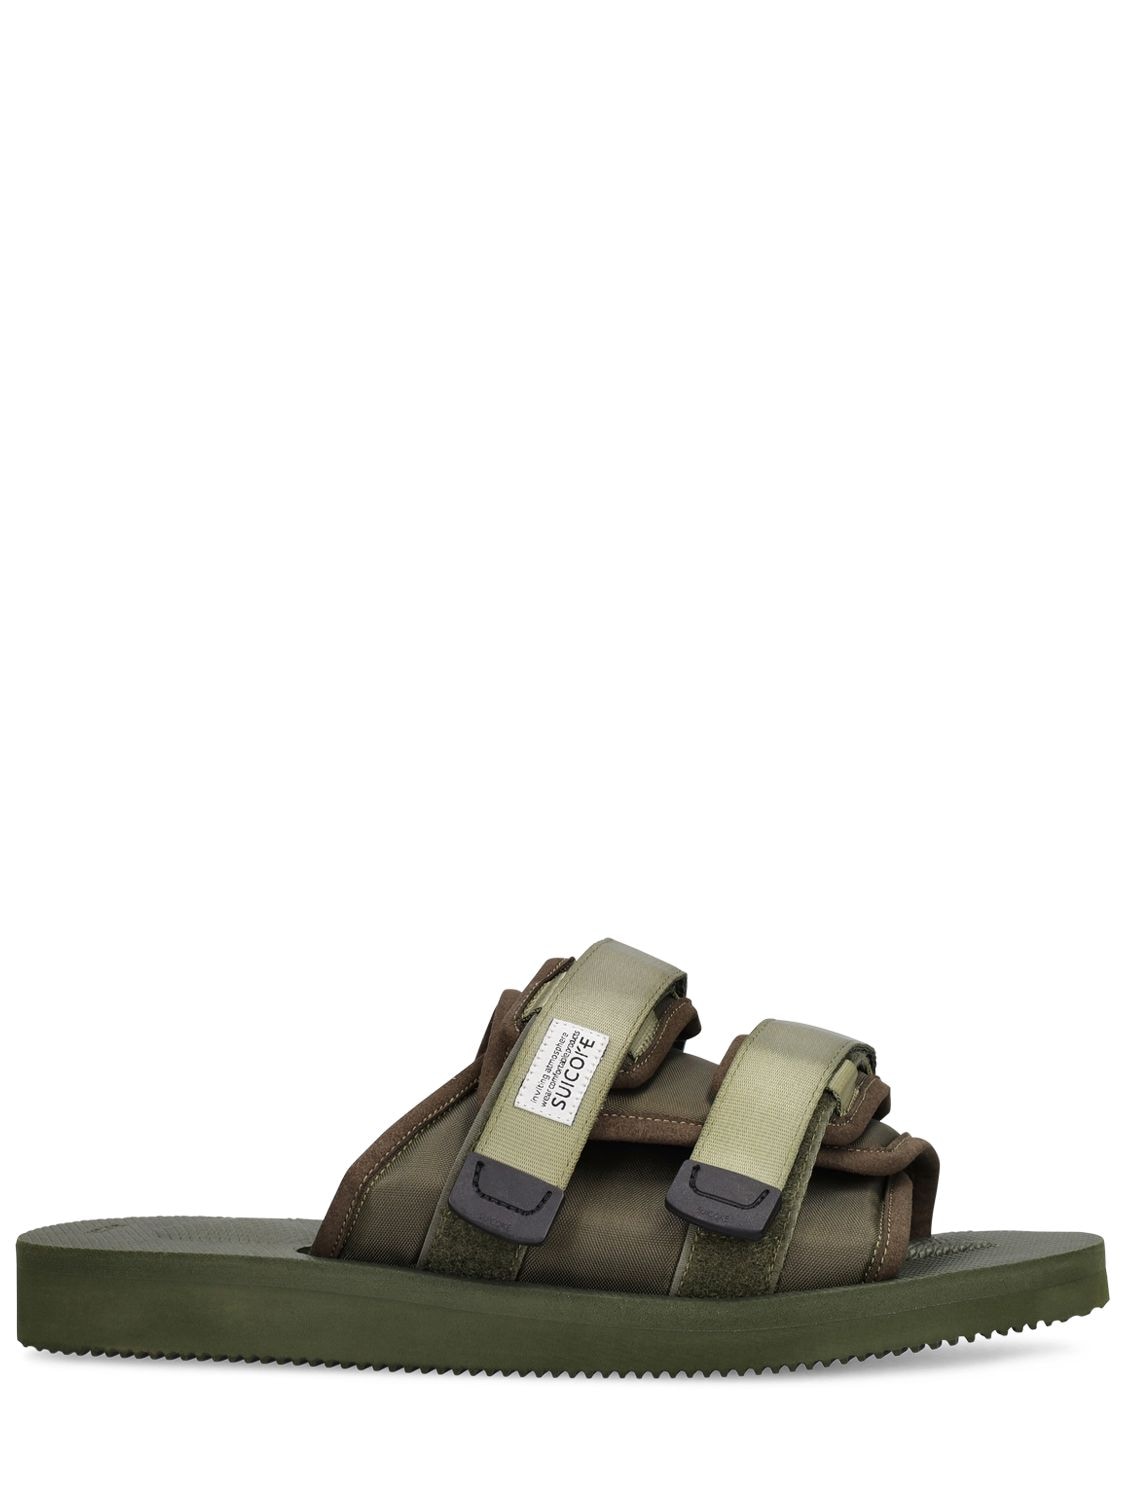 Suicoke Moto Cab Two-strap Sandals In Olive Green | ModeSens